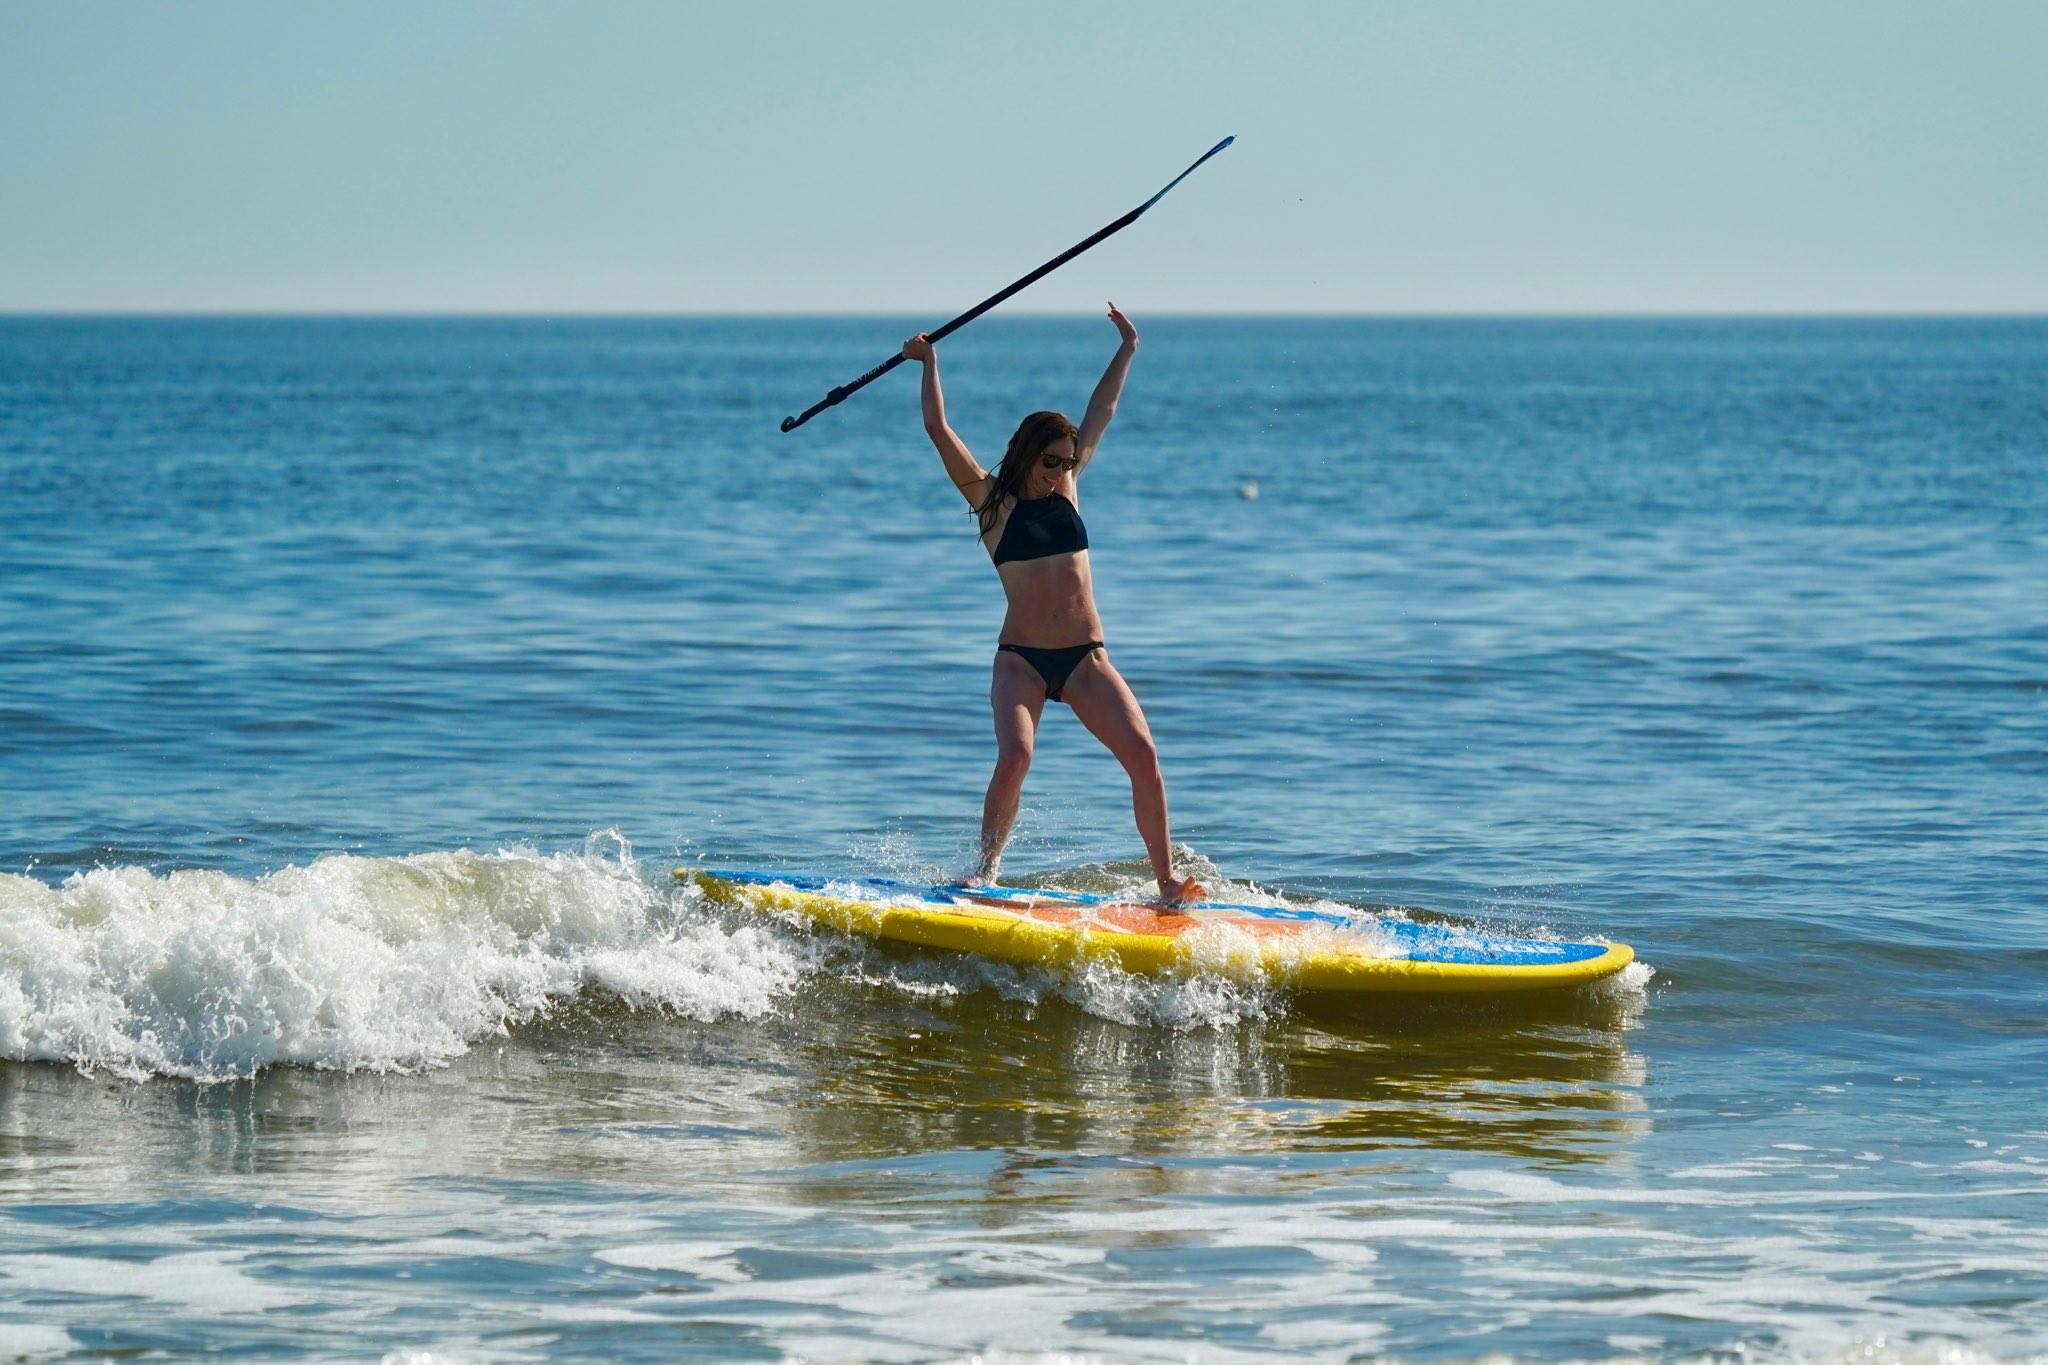 solid boards are the best paddle boards for surfing waves 